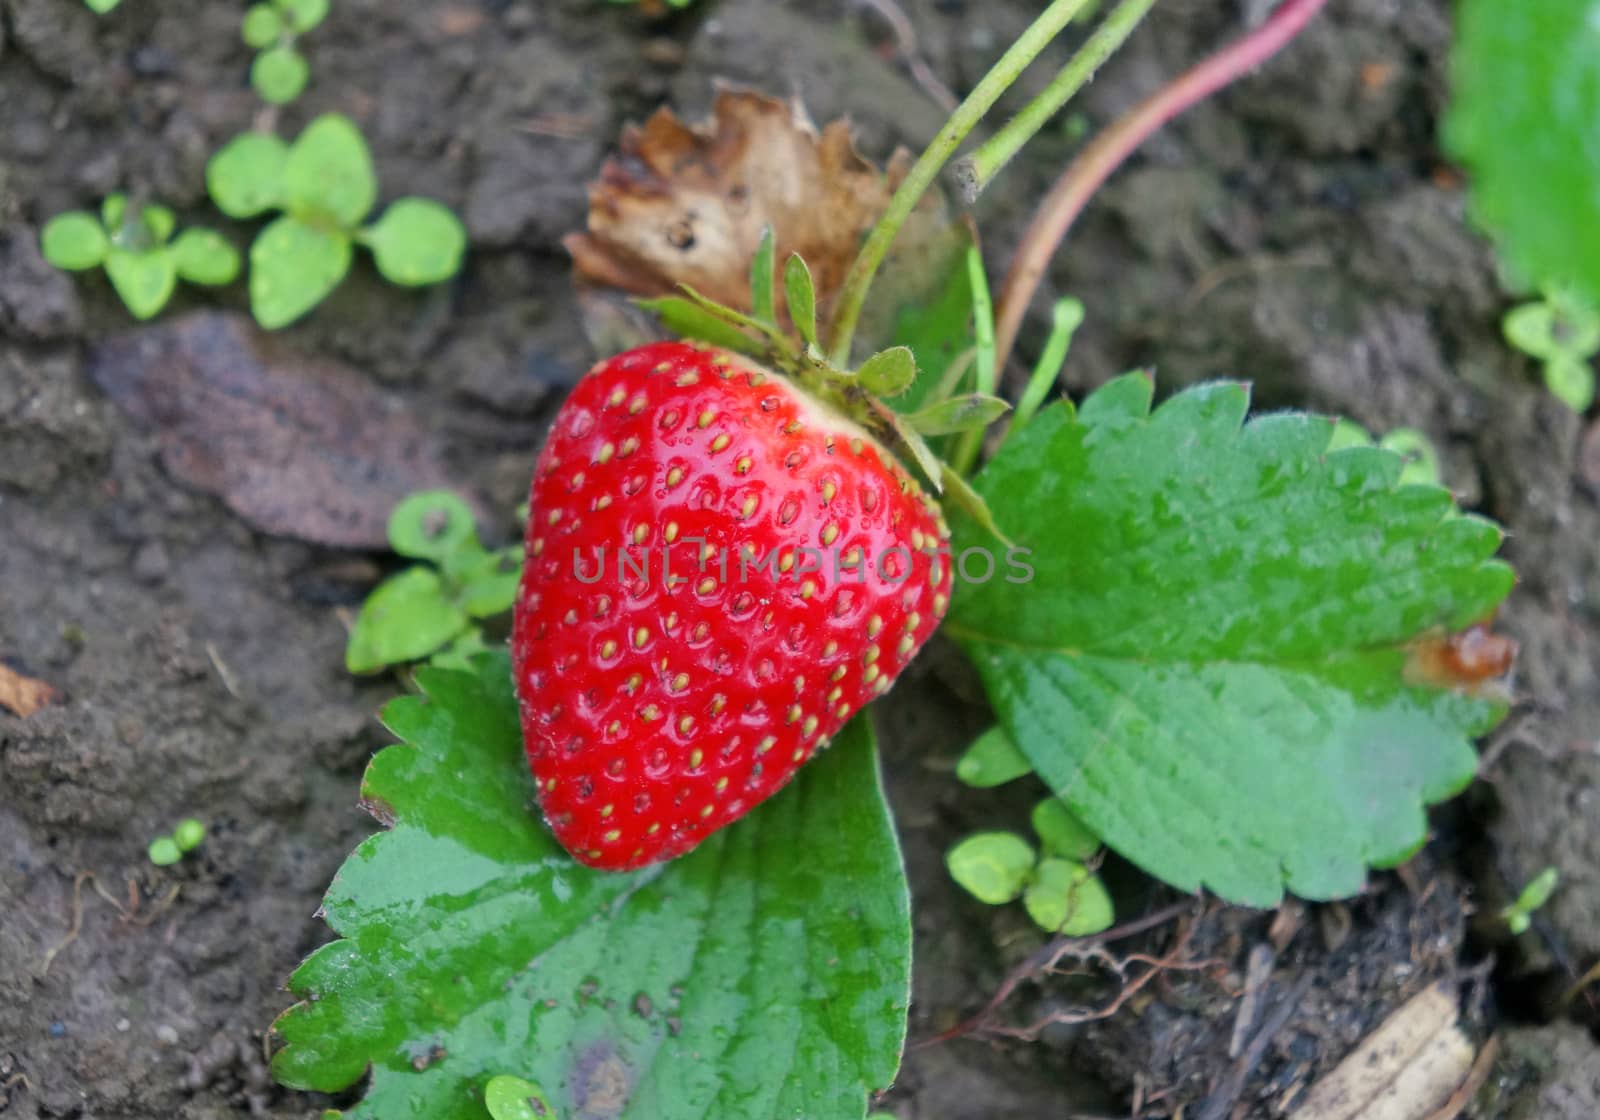 Red ripe strawberry on a bed in the garden